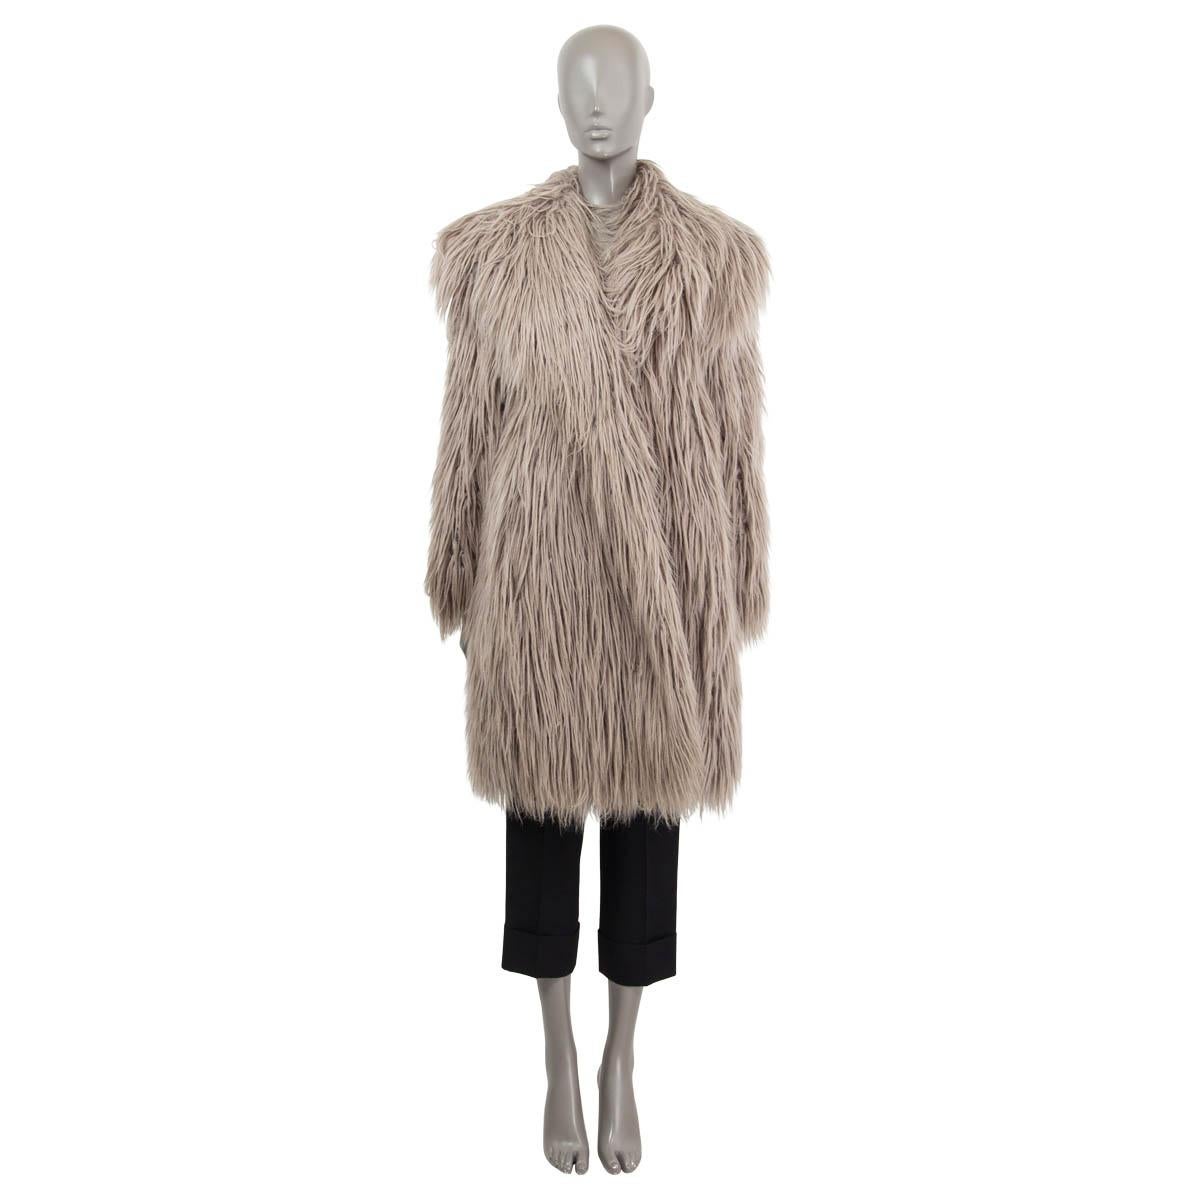 100% authentic Lanvin shaggy faux fur long coat in light grey acrylic (70%) and polyester (30%). With wide notch collar and two slit pockets. Closes with front snaps. Lined with grey silk (100%). Has been worn and is in excellent condition.